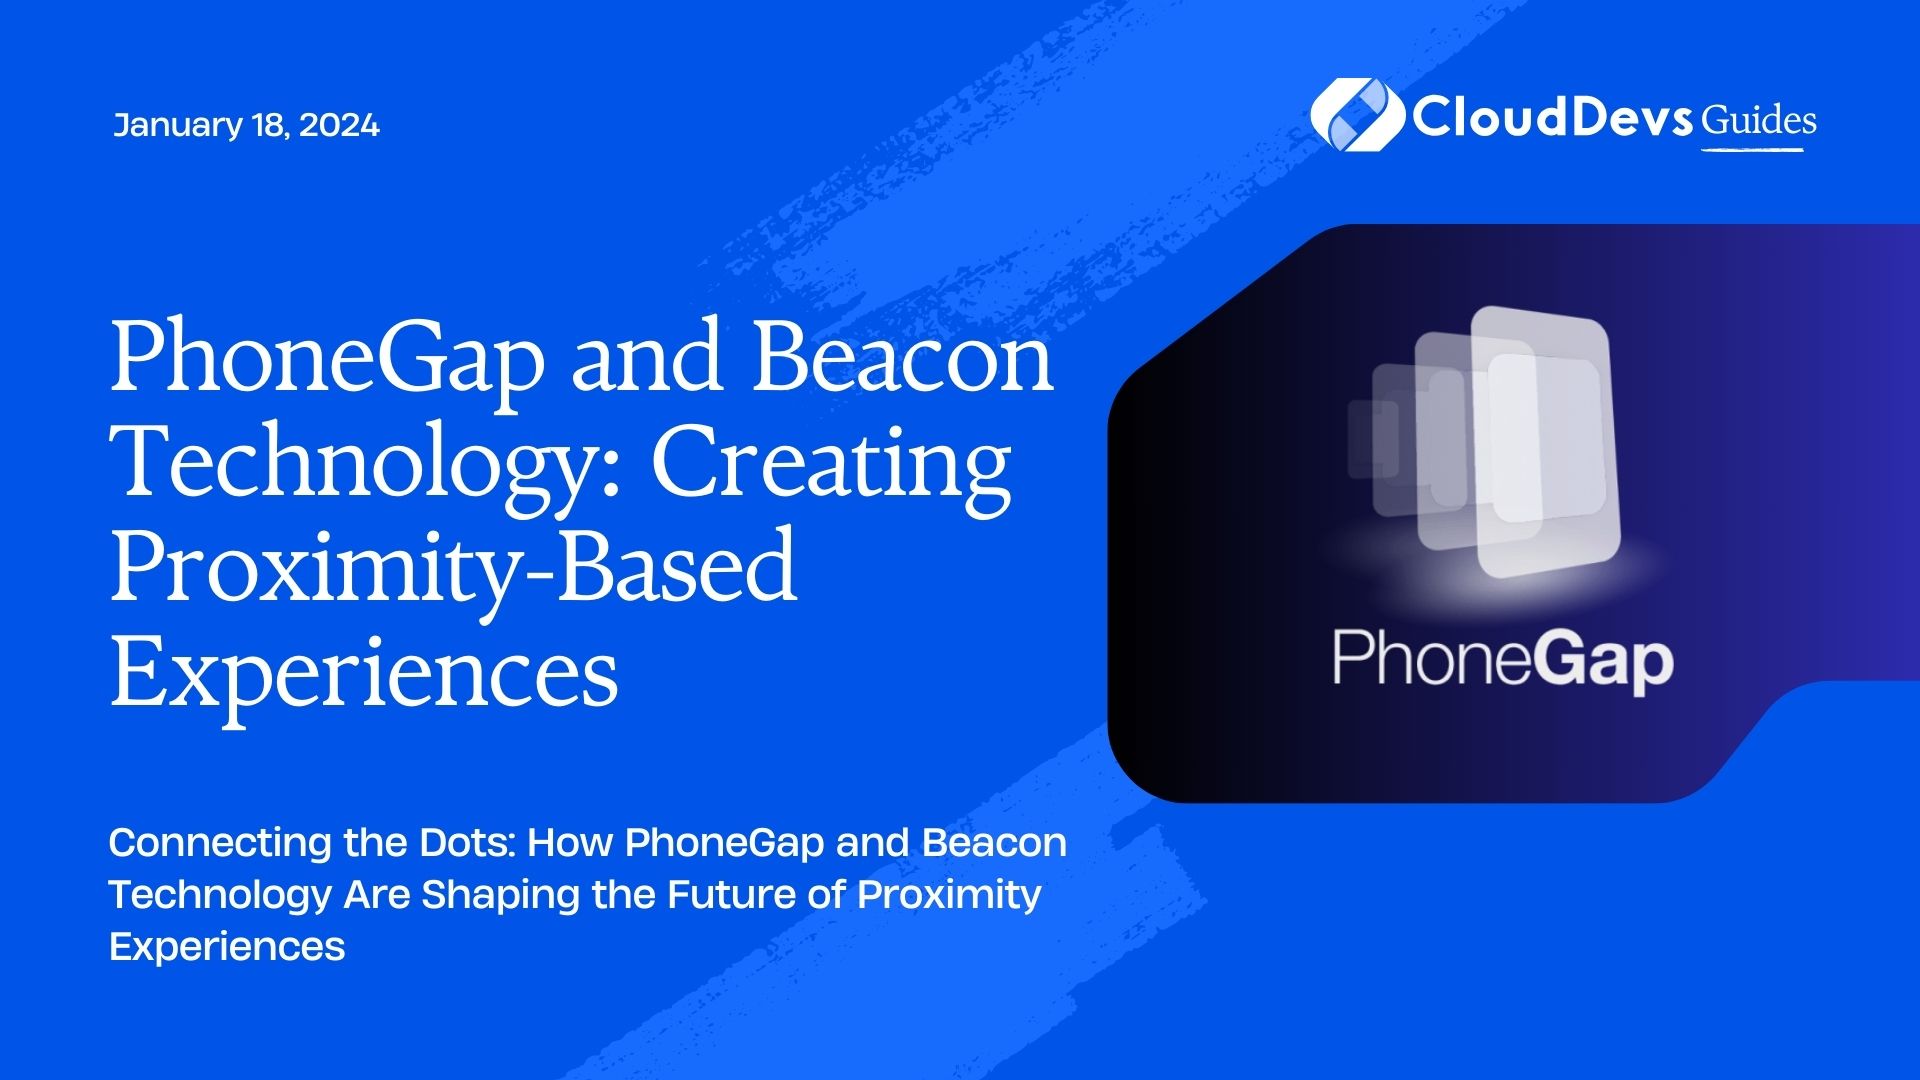 PhoneGap and Beacon Technology: Creating Proximity-Based Experiences